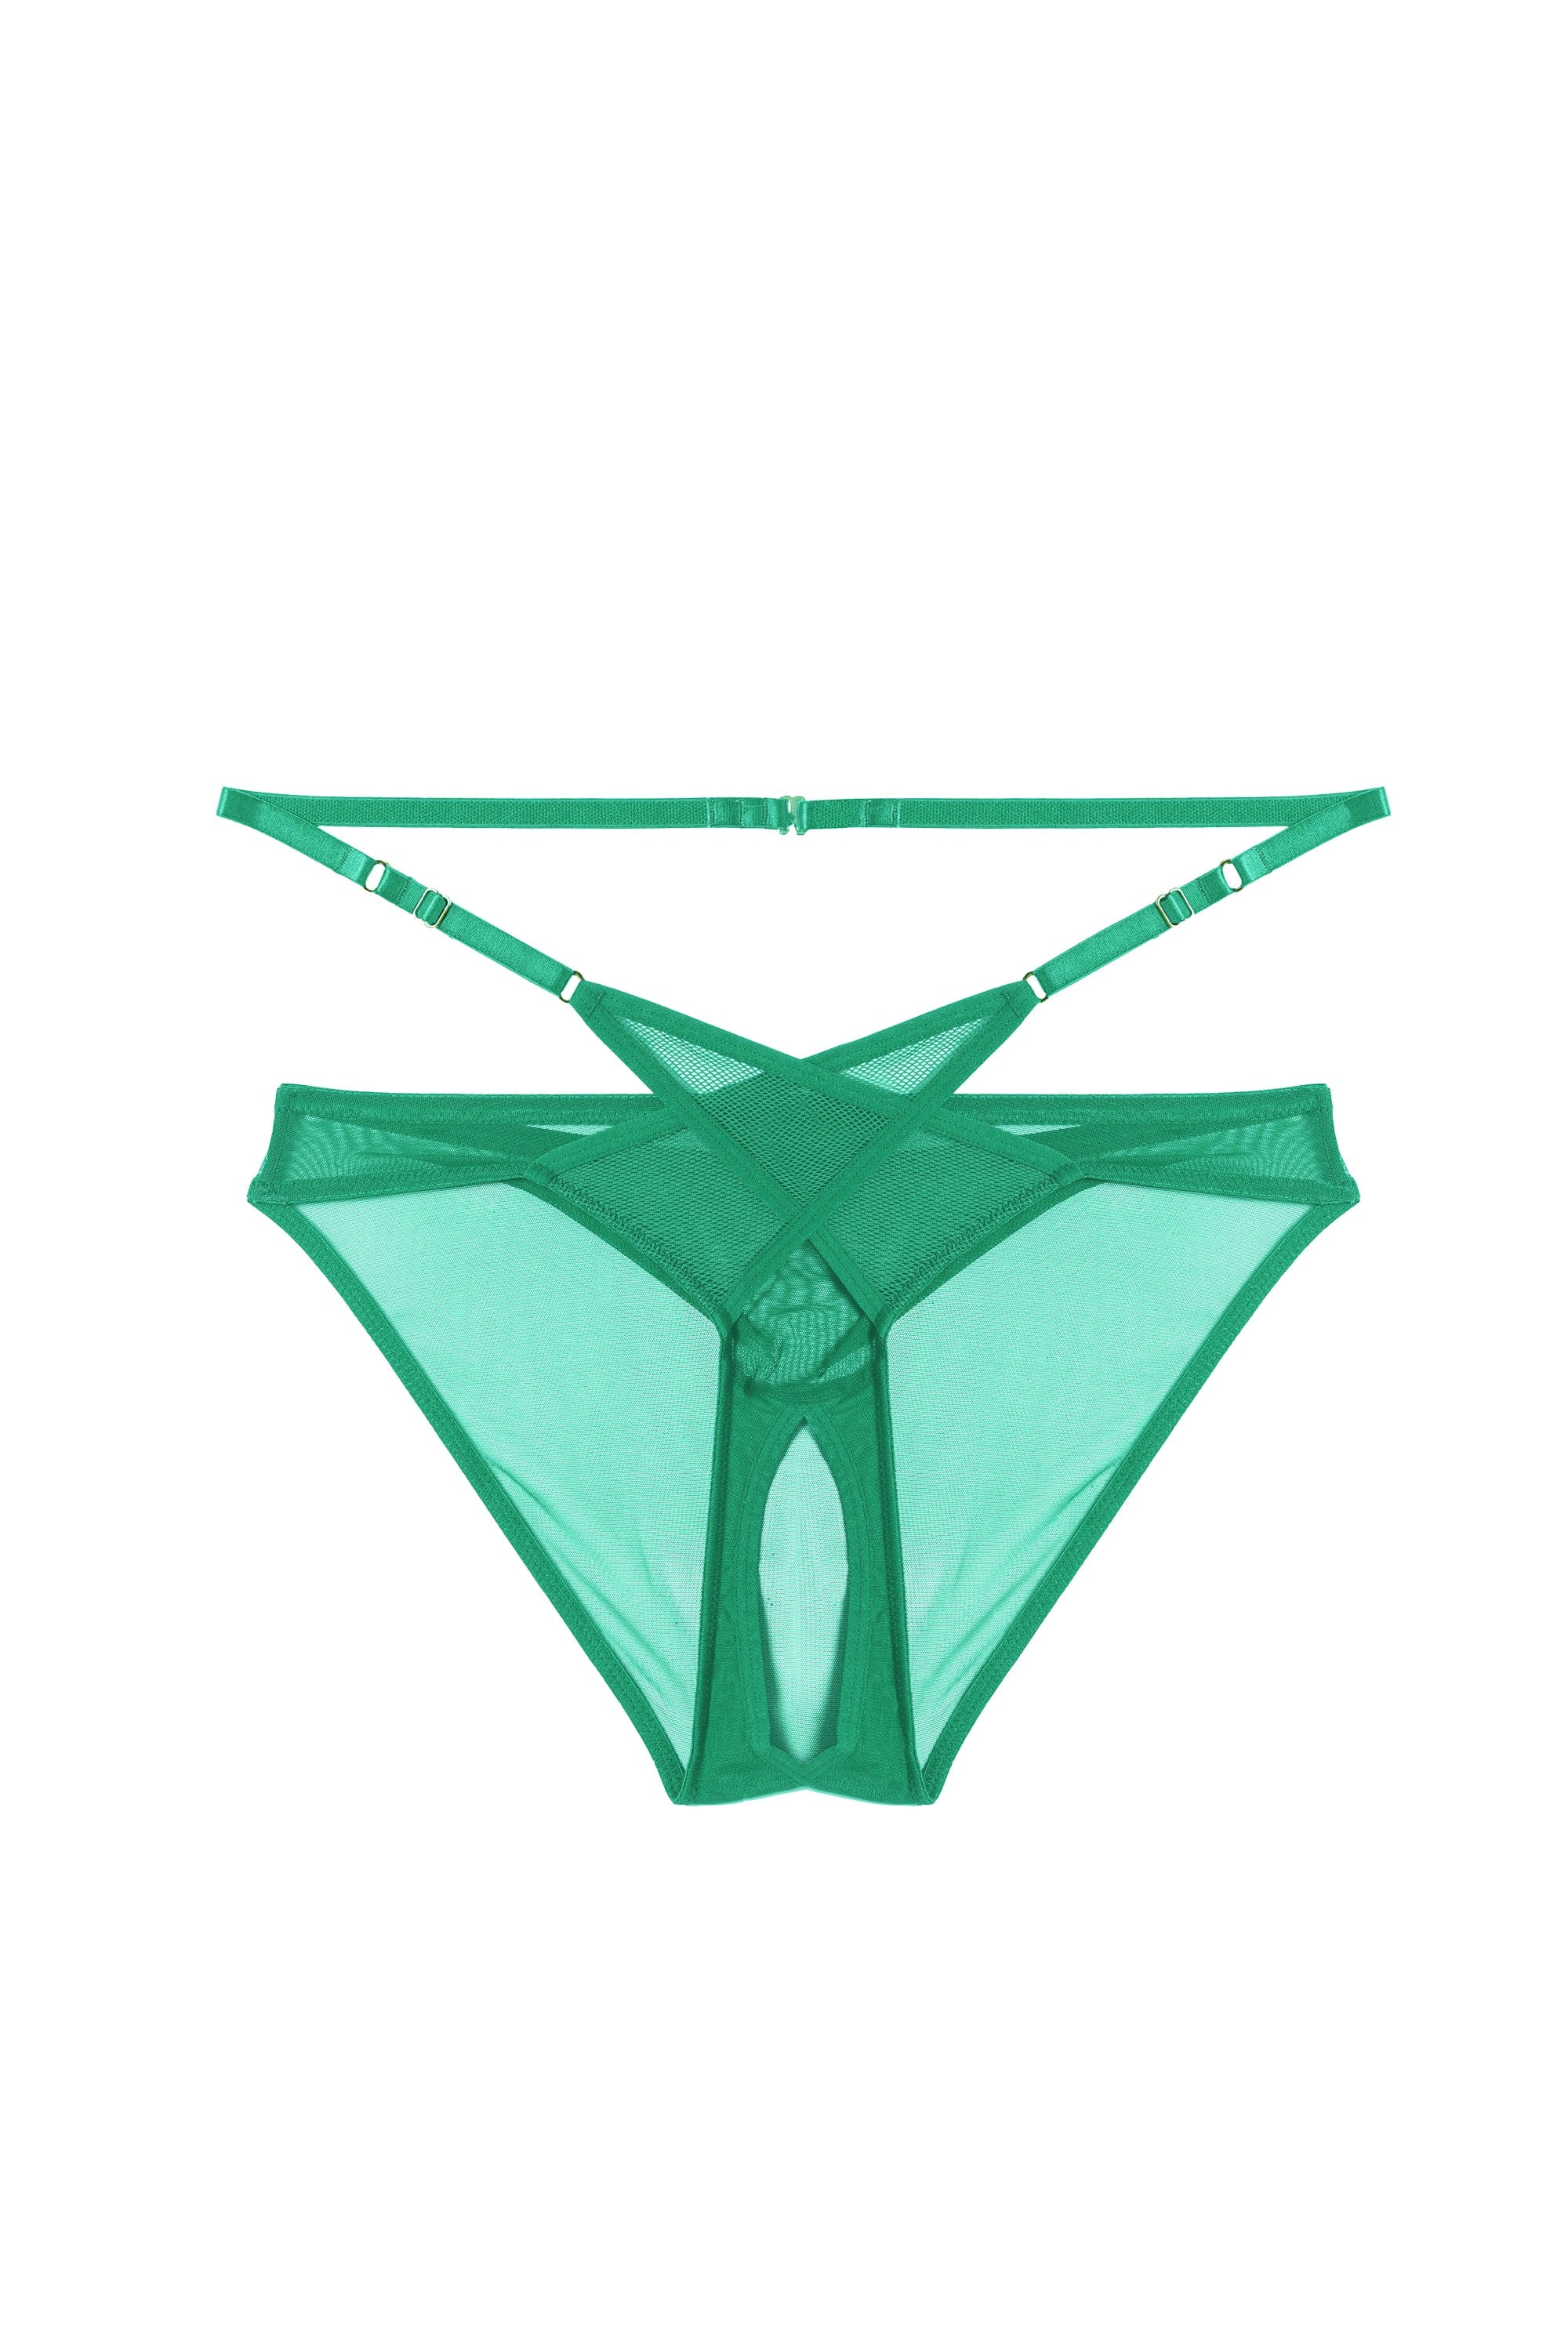 Eddie Green Crossover Wrap Crotchless Brazilian Brief – Playful